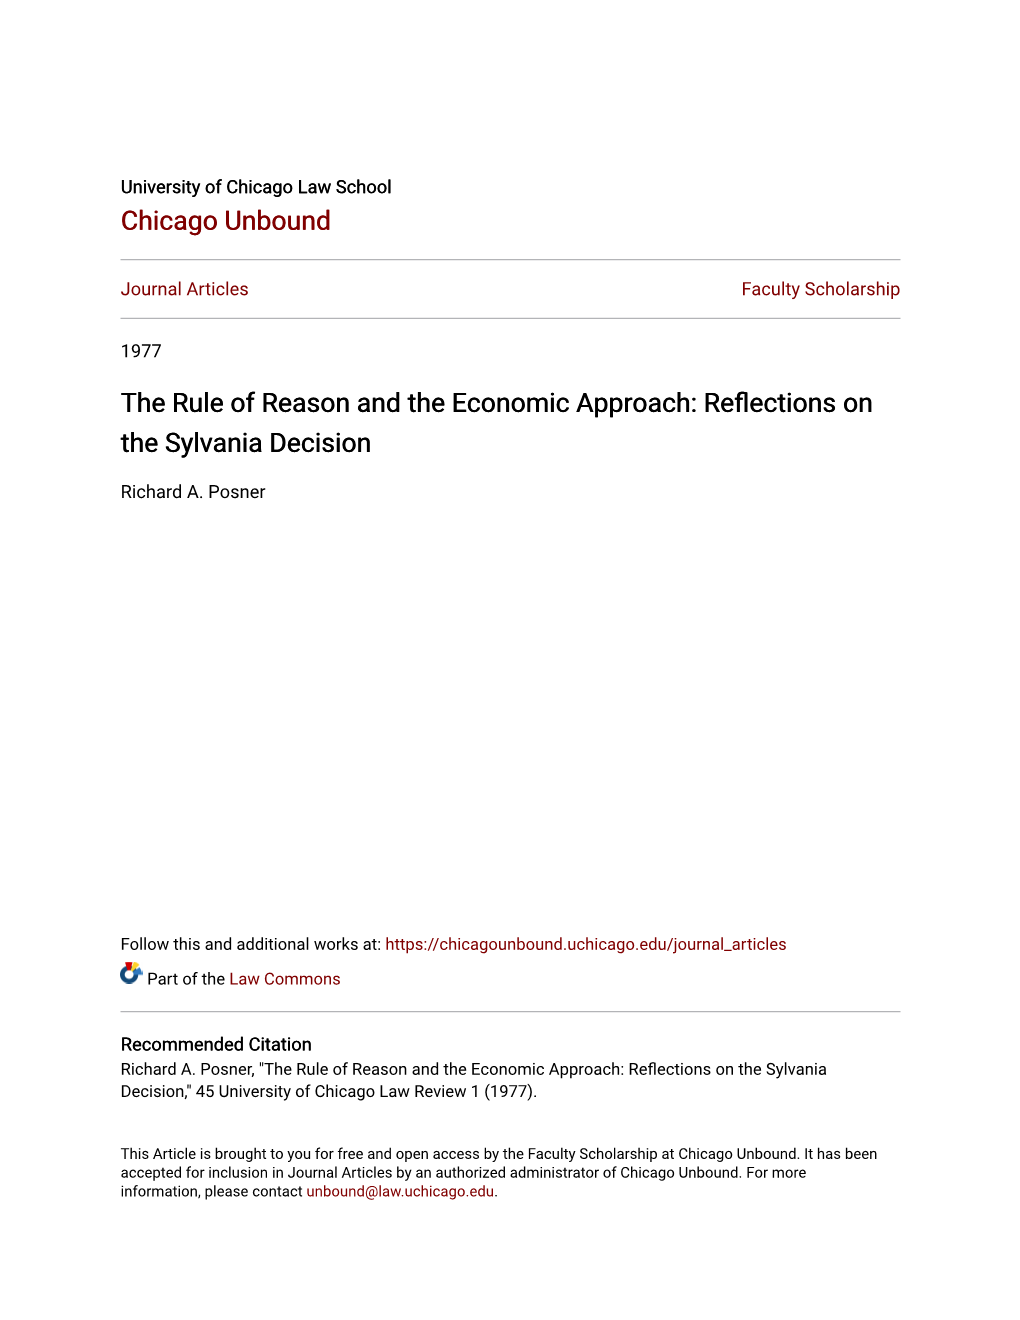 The Rule of Reason and the Economic Approach: Reflections on the Sylvania Decision